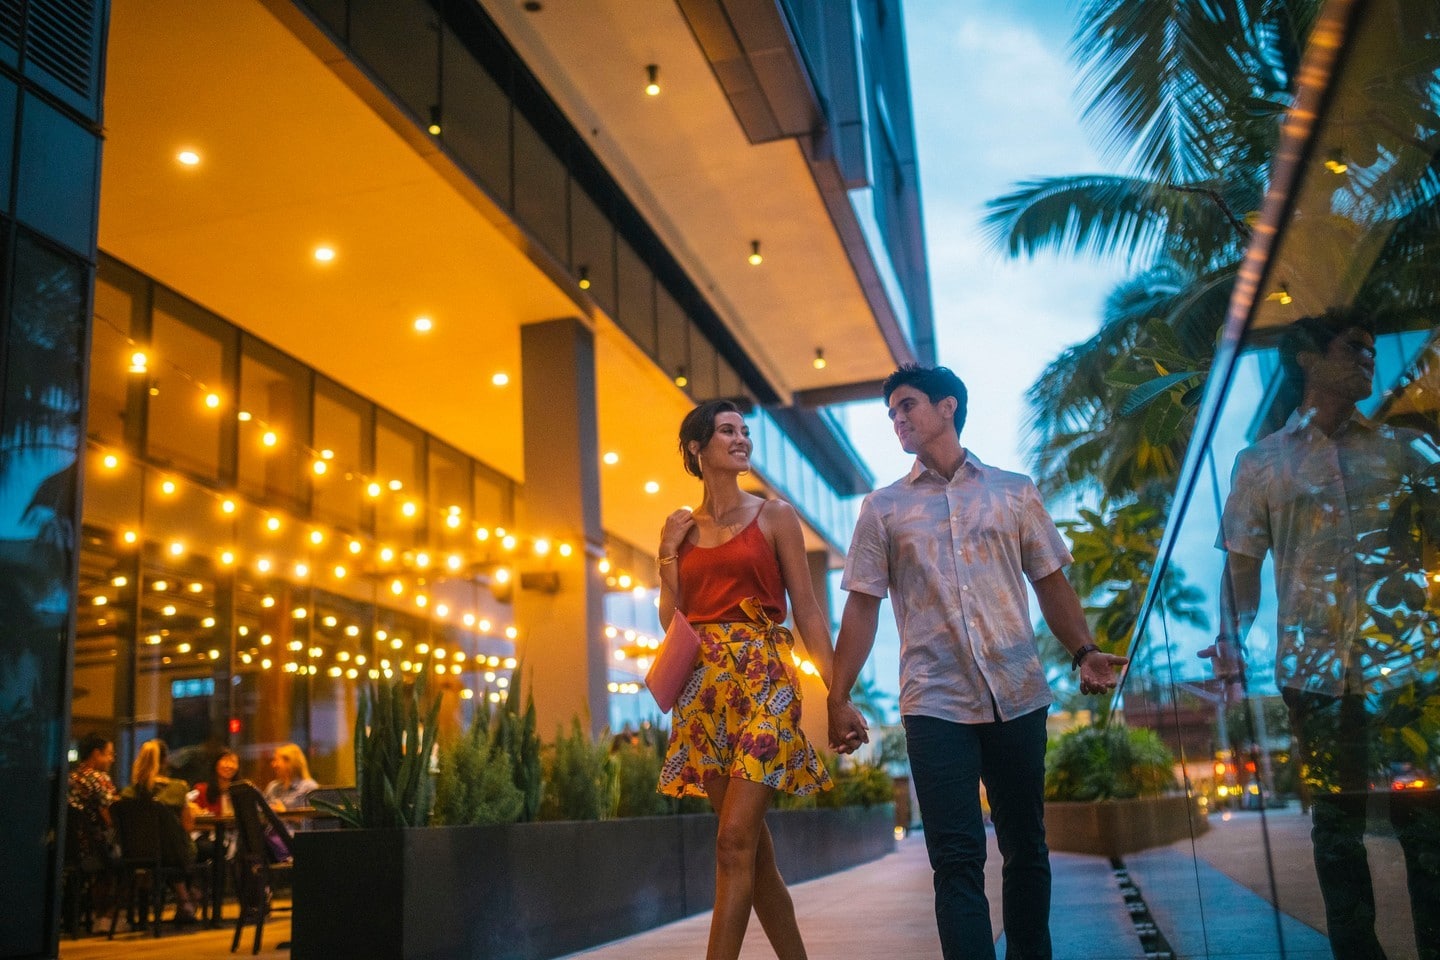 Celebrate New Year’s Eve with a relaxing stroll through our open-air community before you enjoy this evening’s revelry. We’d love to see you here.